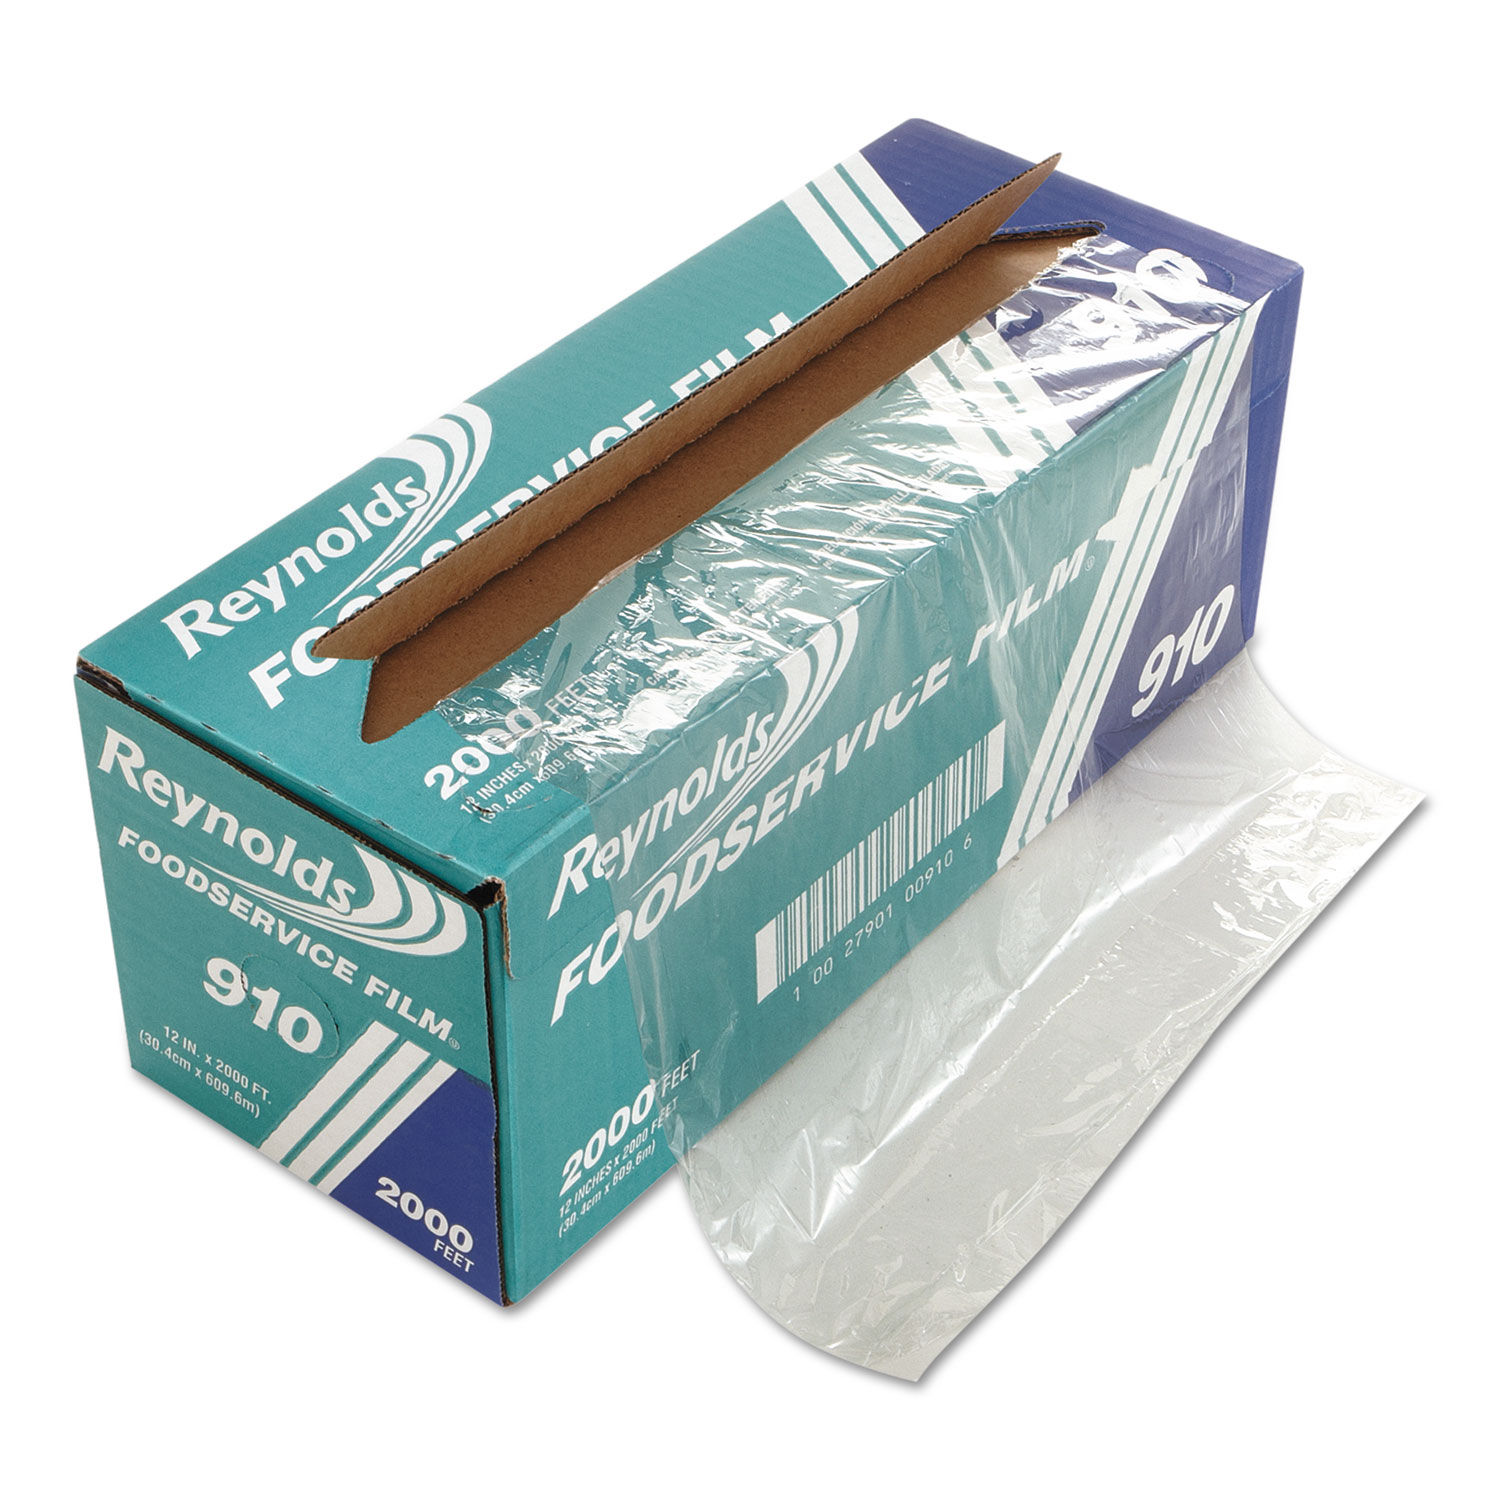 PVC Film Roll with Cutter Box by Reynolds Wrap® RFP910